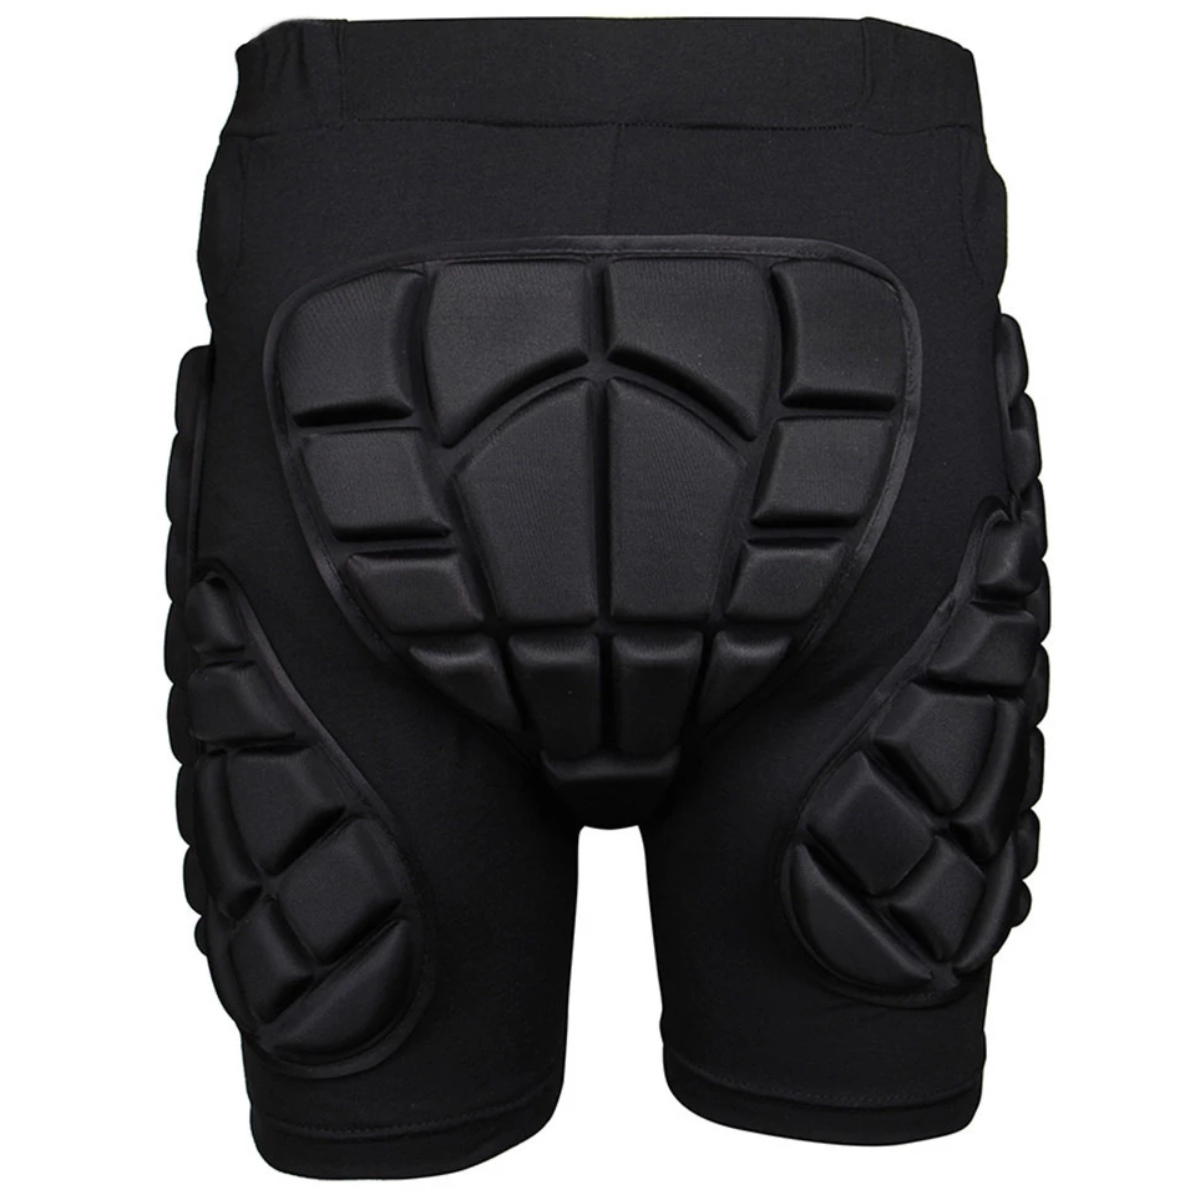 A pair of black Motorcycle Protective Armor Pants for Men & Women with knee pads, offering protective gear for motorcycle enthusiasts.